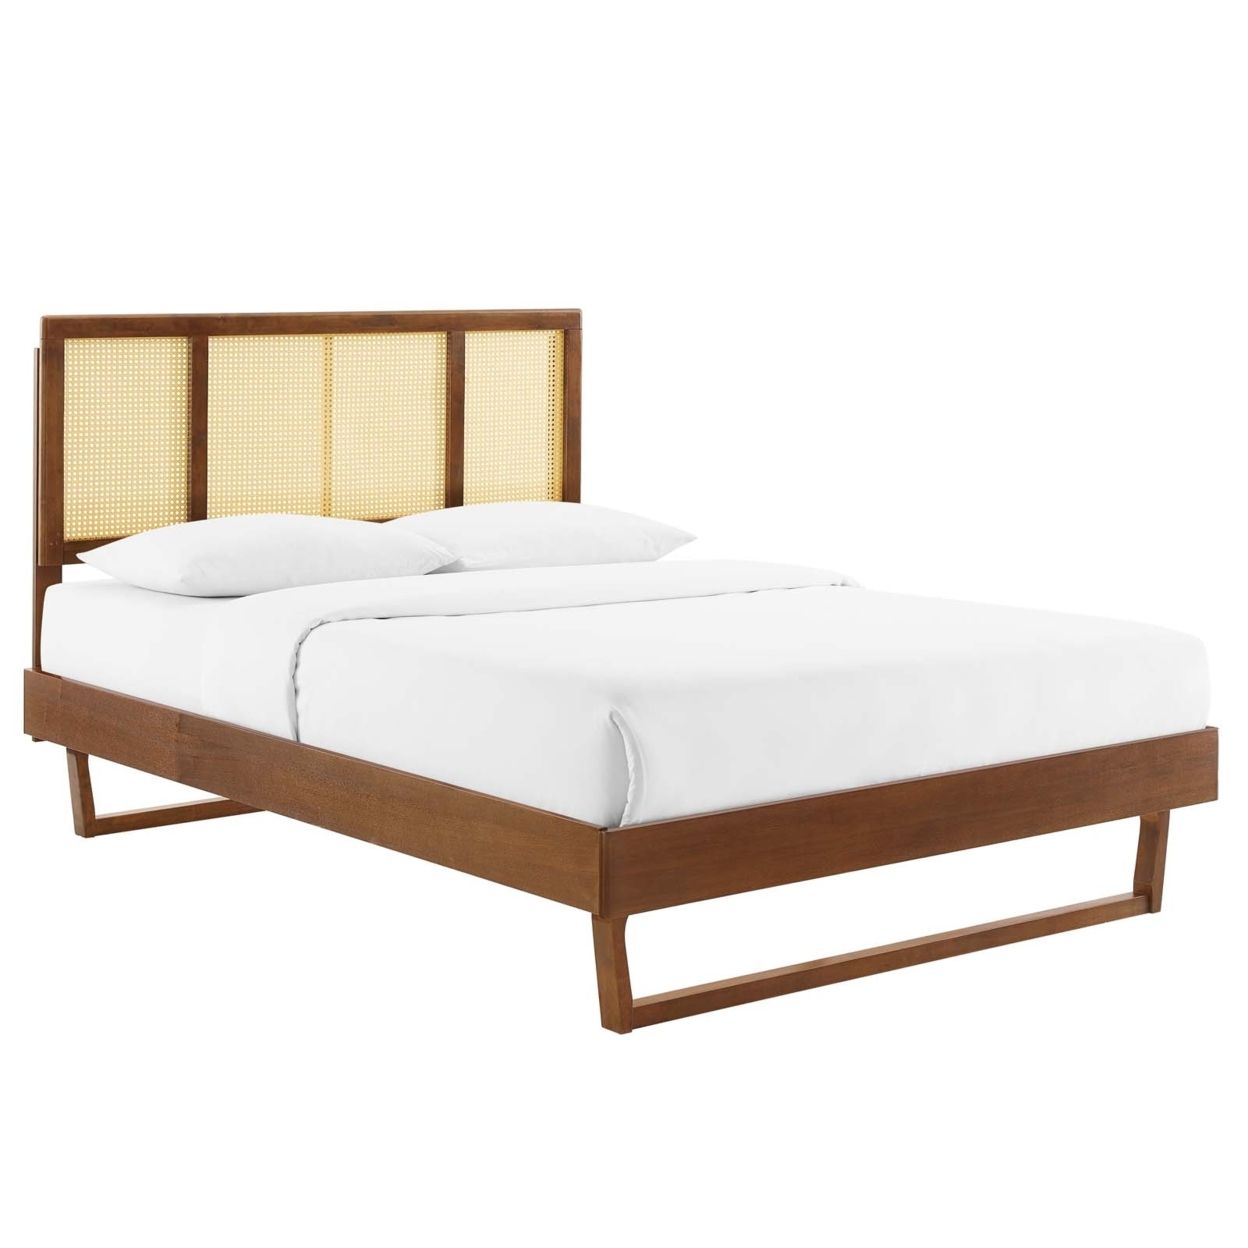 Kelsea Cane And Wood Queen Platform Bed With Angular Legs, Walnut